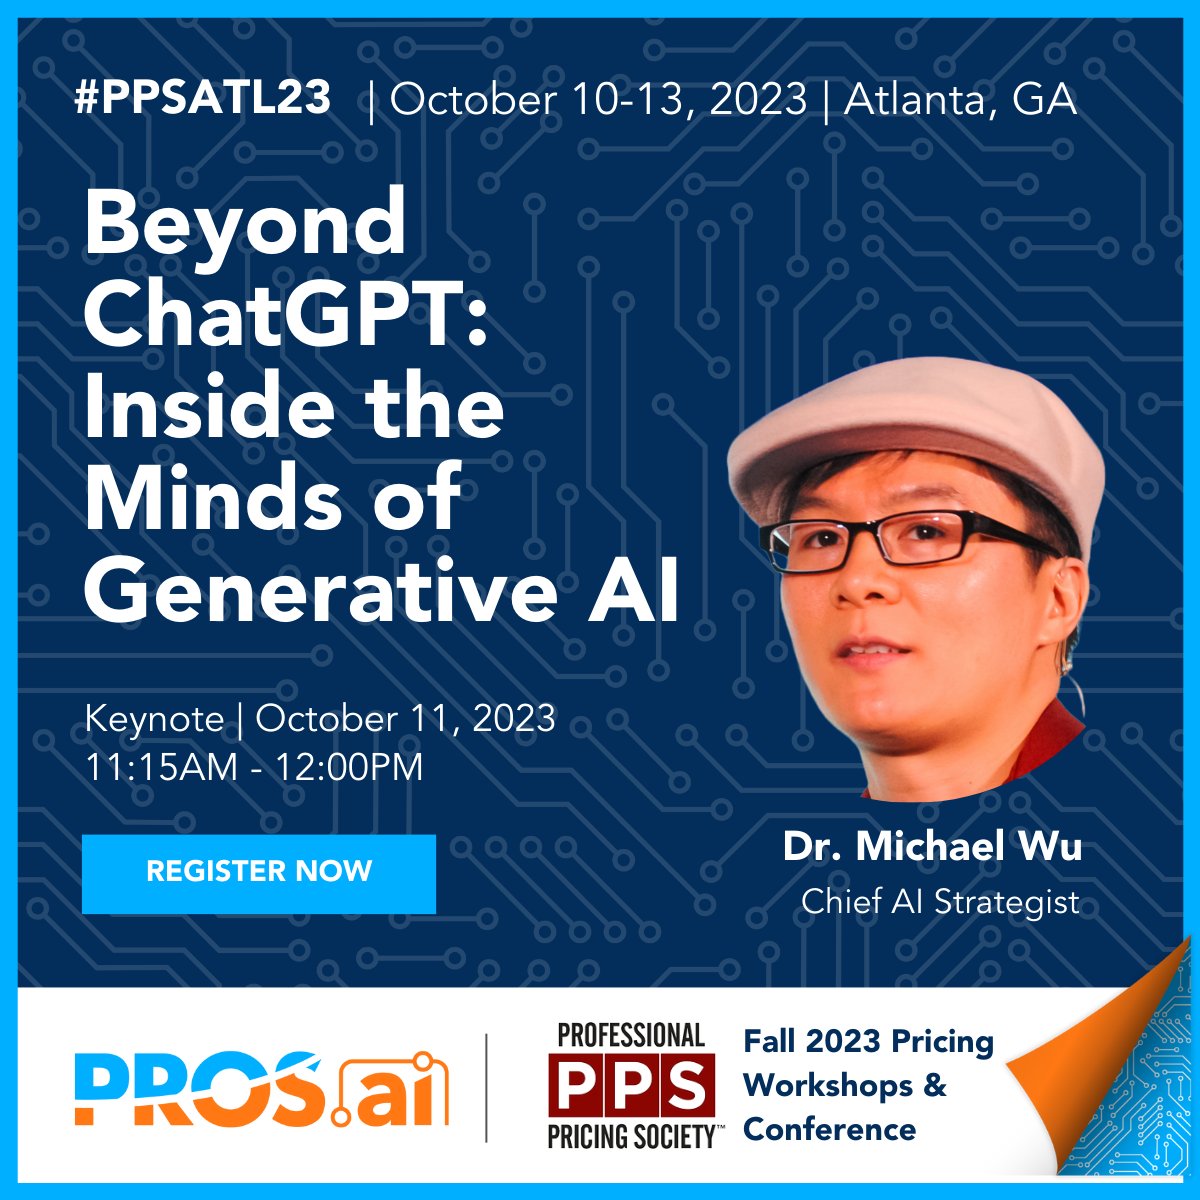 Have you ever wanted to go 'Beyond Chat GPT: Inside the Minds of Generative #AI'? Join Dr. @mich8elwu, Chief AI Strategist at @PROS_Inc, at @PricingSociety Fall conference in Atlanta, GA on Friday October 13, from 11:15 am-12:00pm. #PPSATL23

Register Now: ms.spr.ly/60119e17H